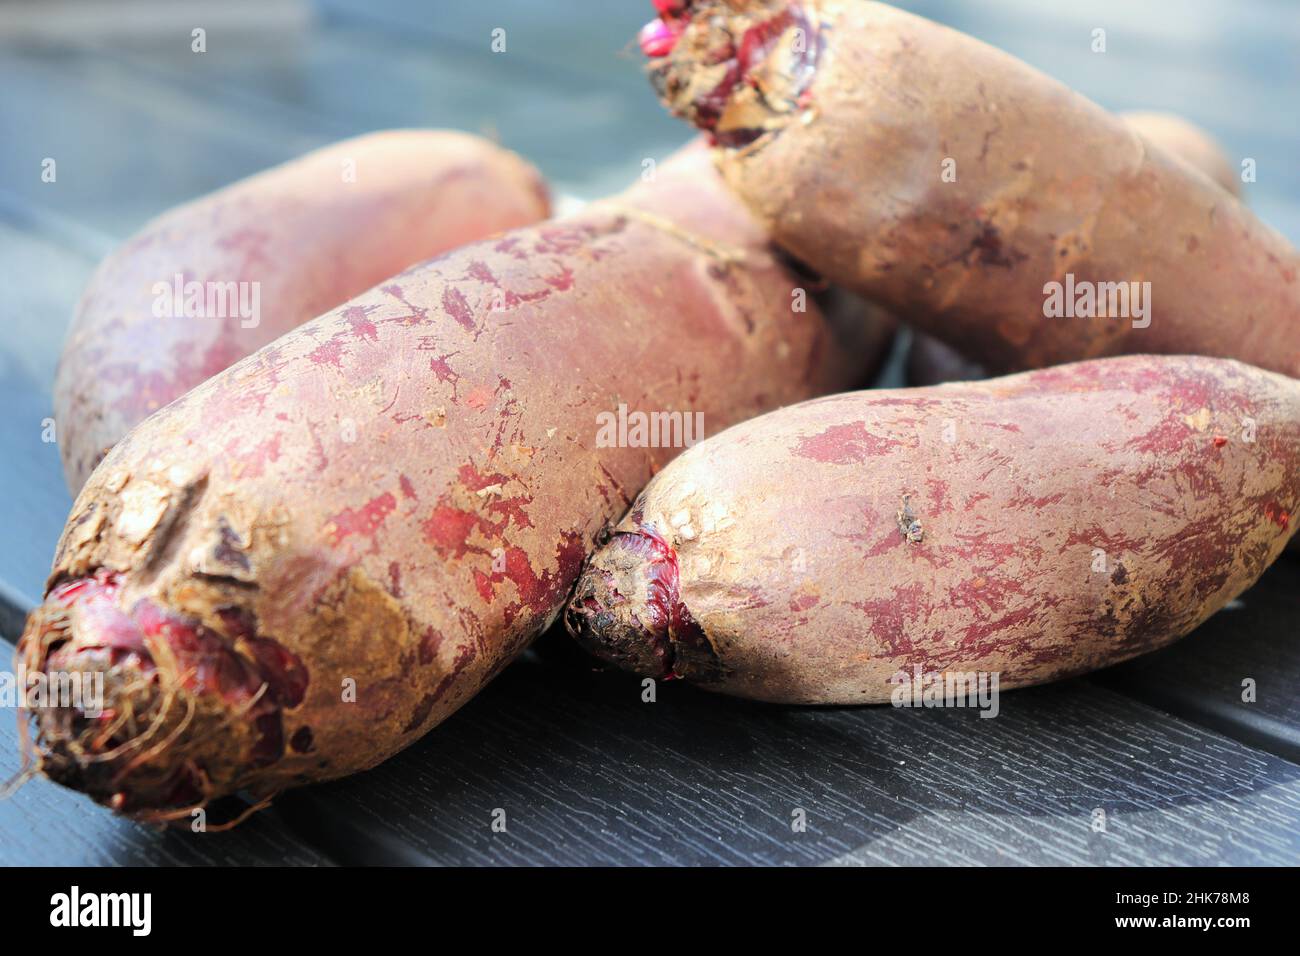 Red beet or beetroot on the wooden table. Stock Photo